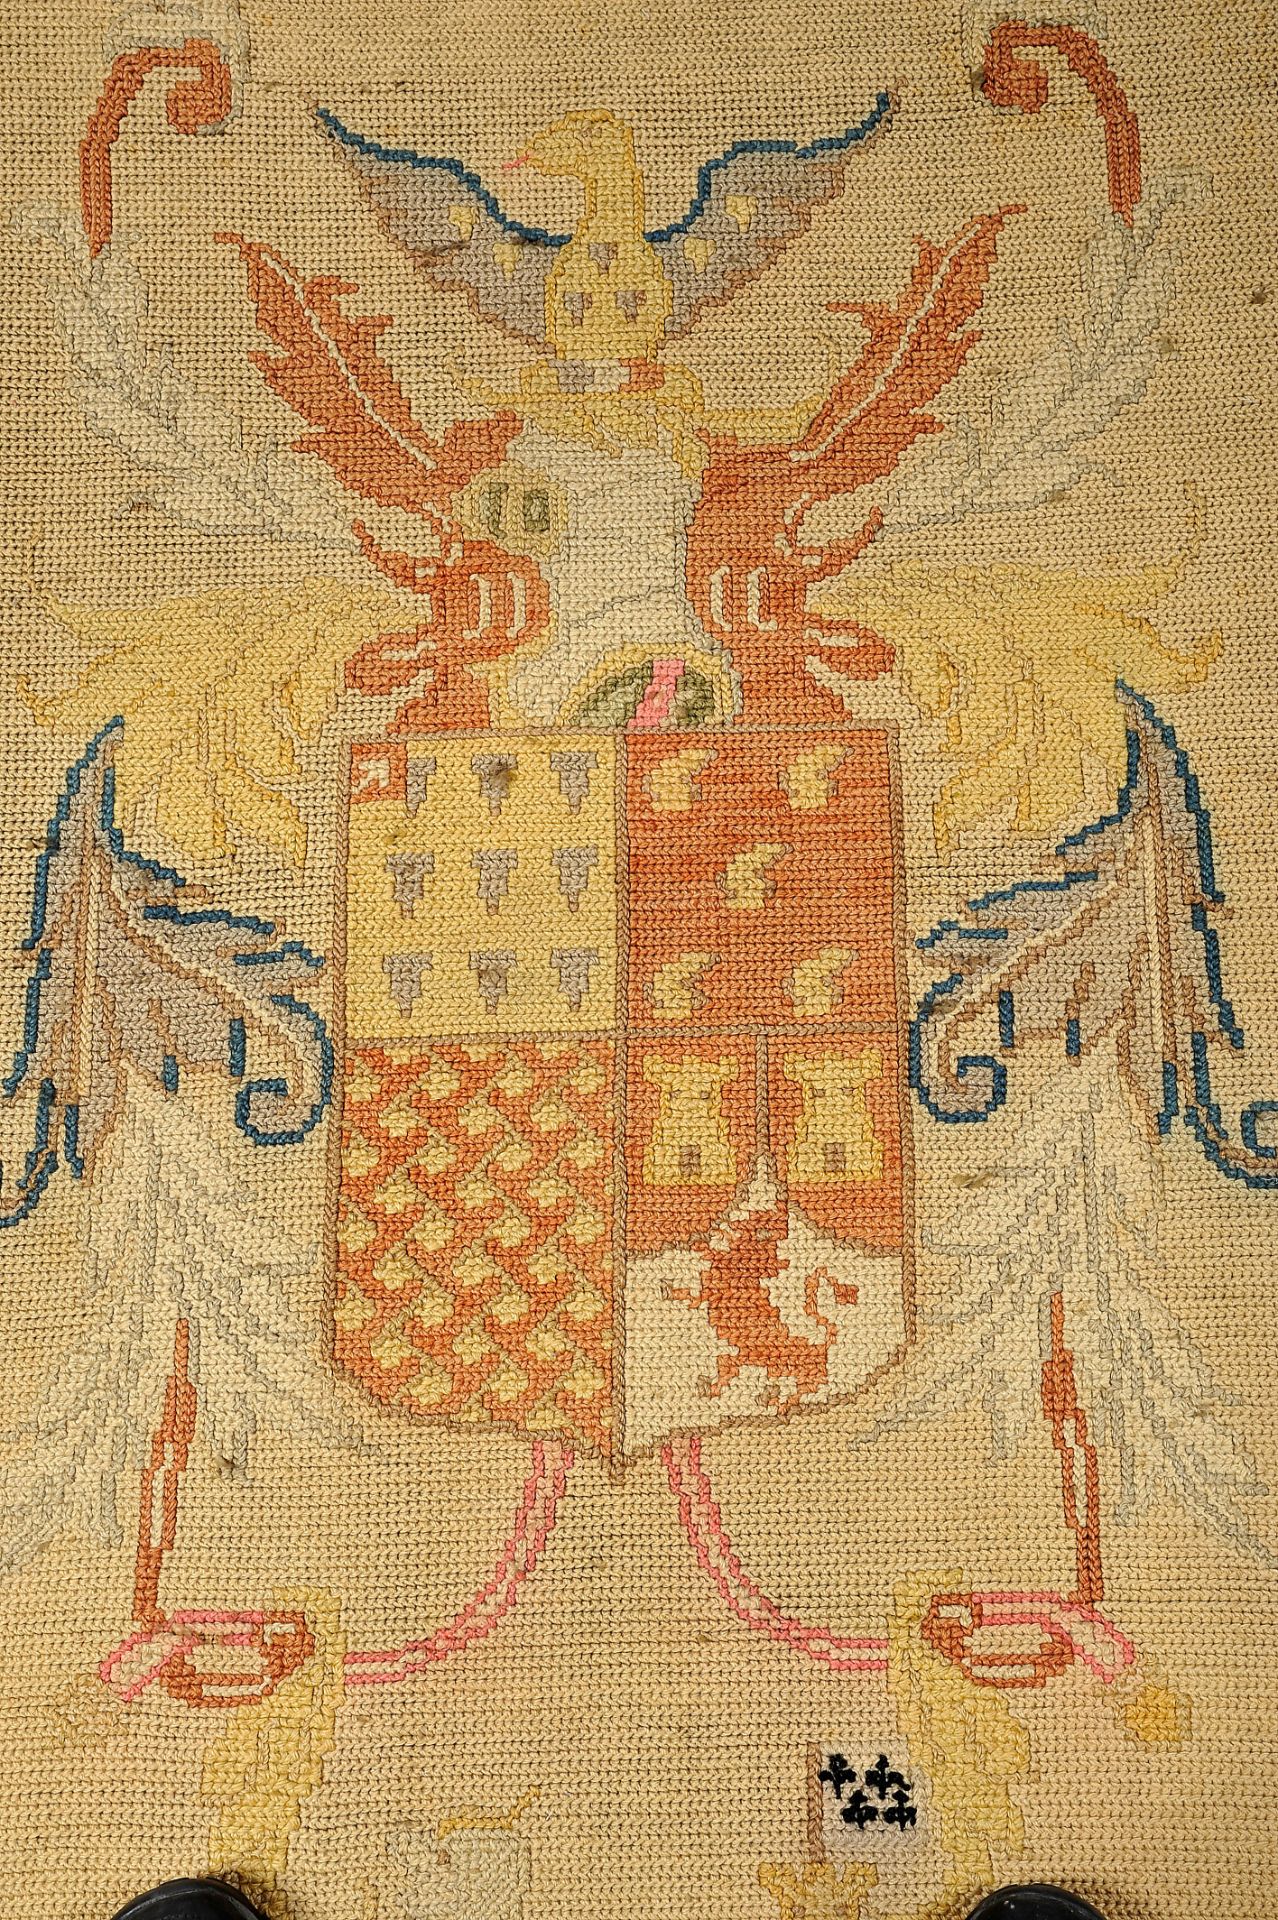 A Small Tapestry, Arraiolos, wool yarn, polychrome decoration with a Portuguese coat of arms: I